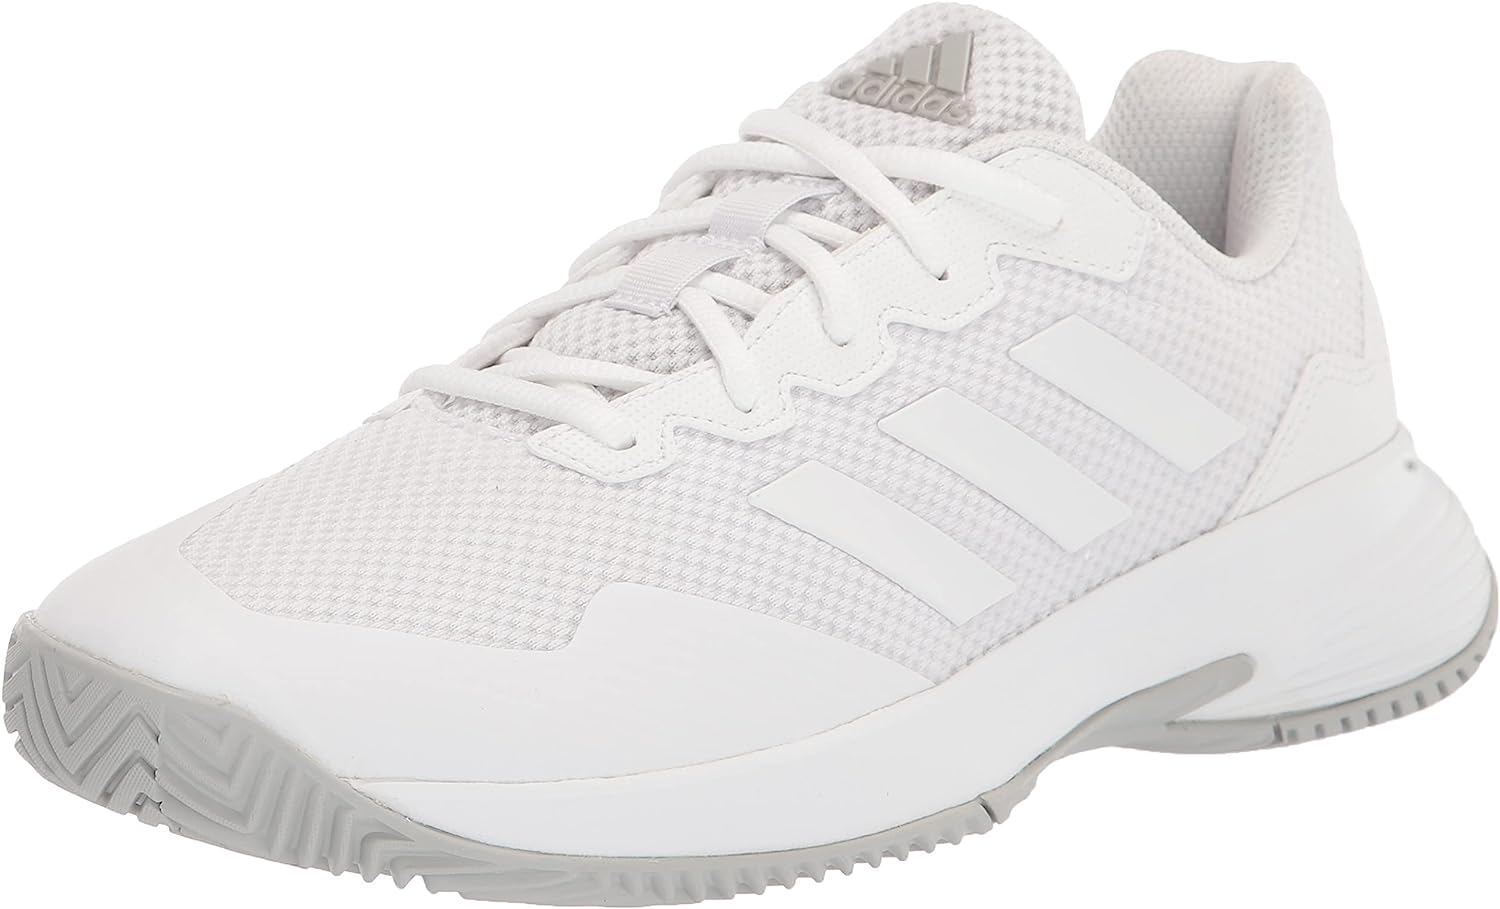 tennis court shoes review